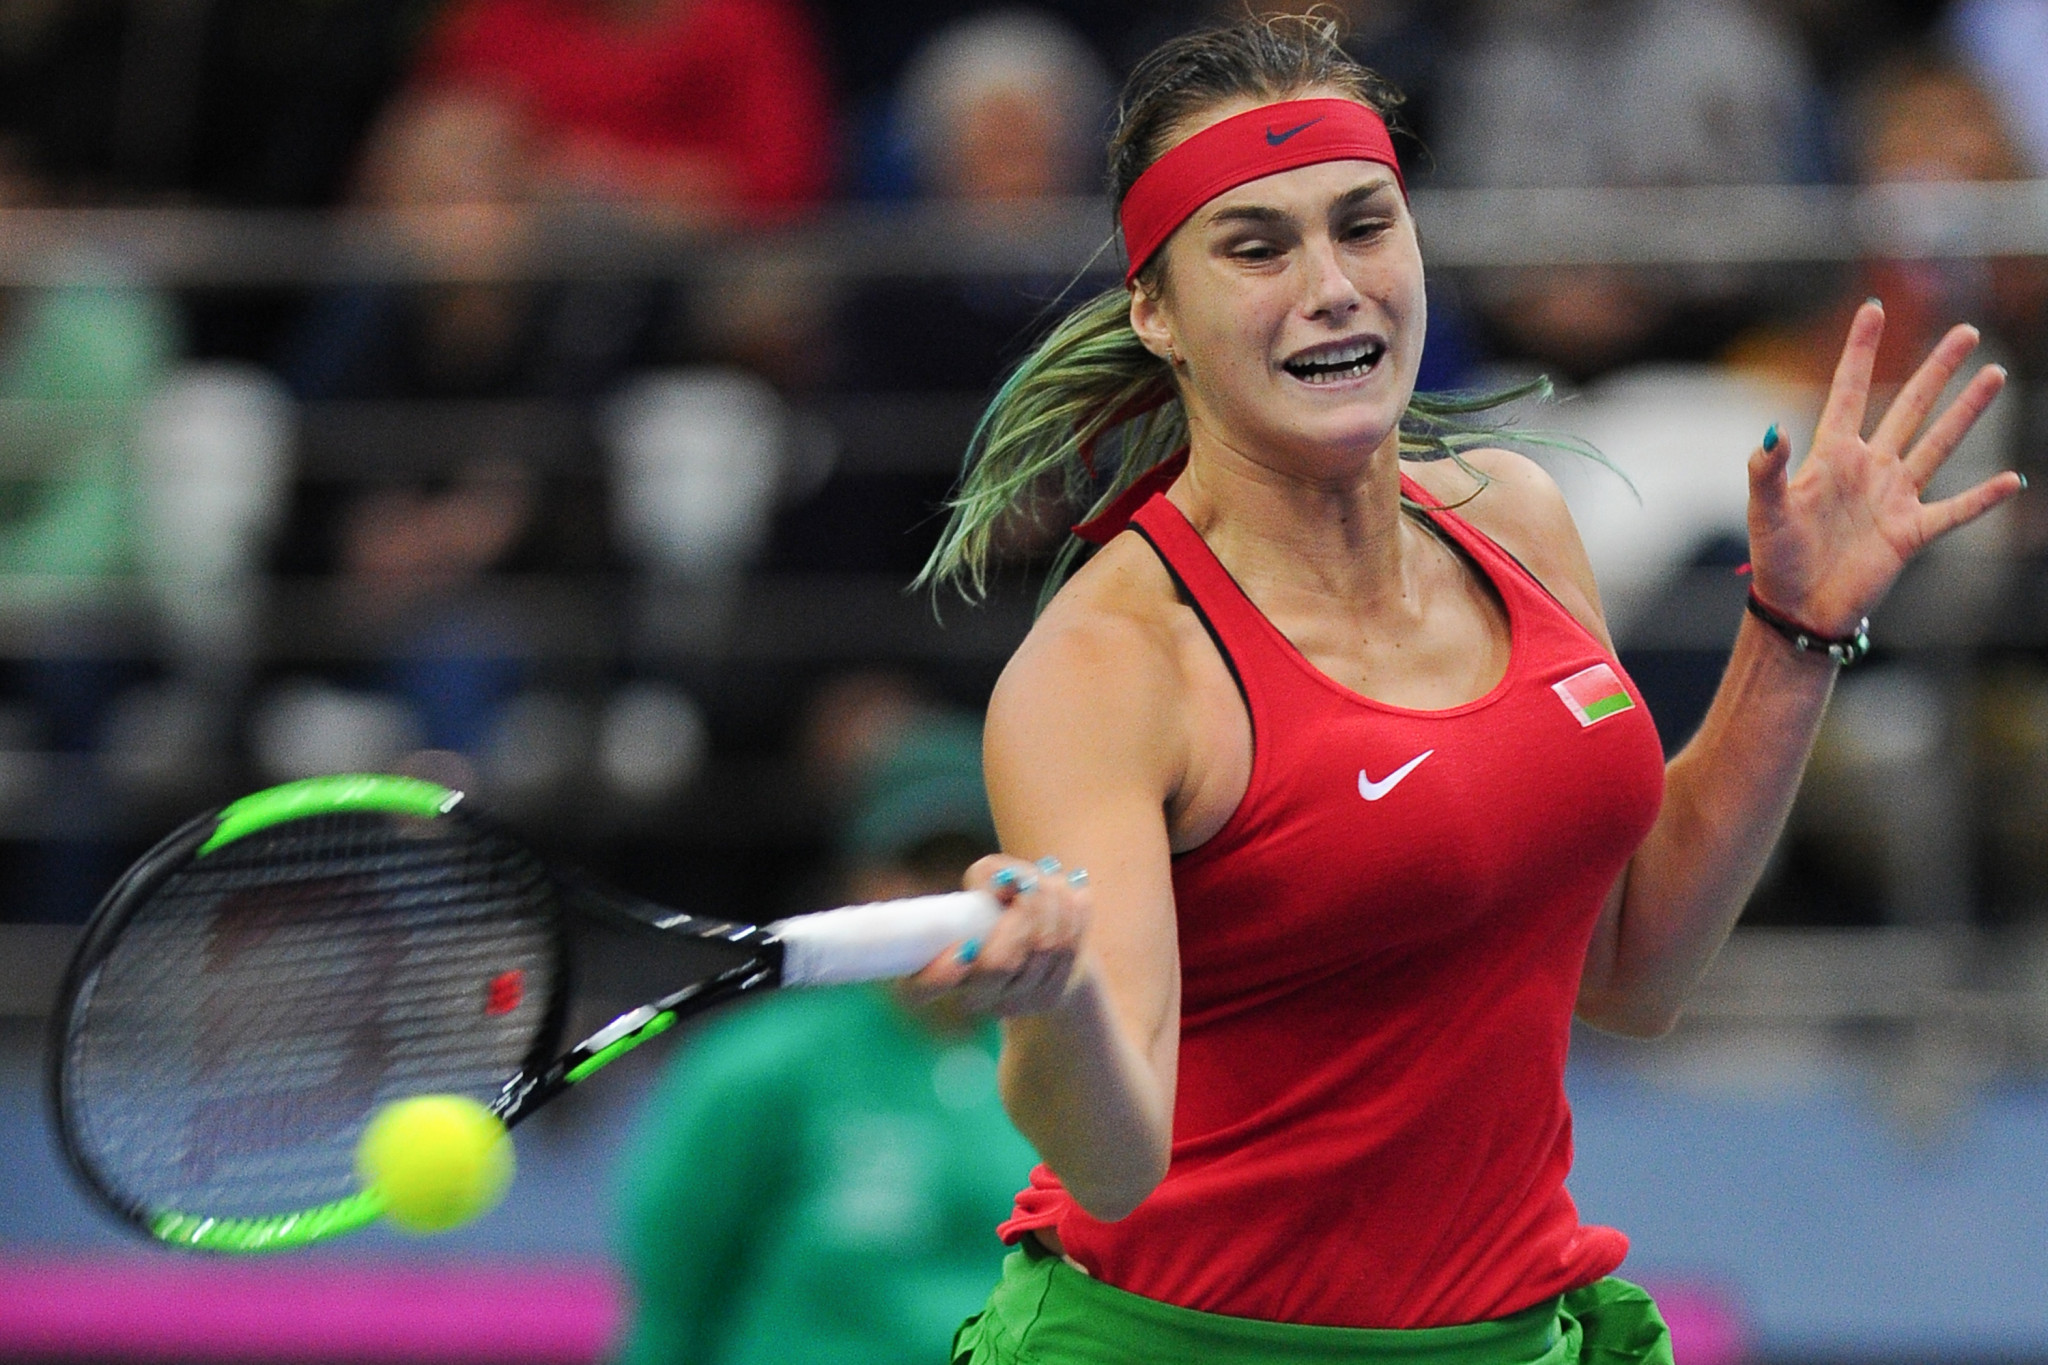 Belarus and United States tied after opening day of Fed Cup final